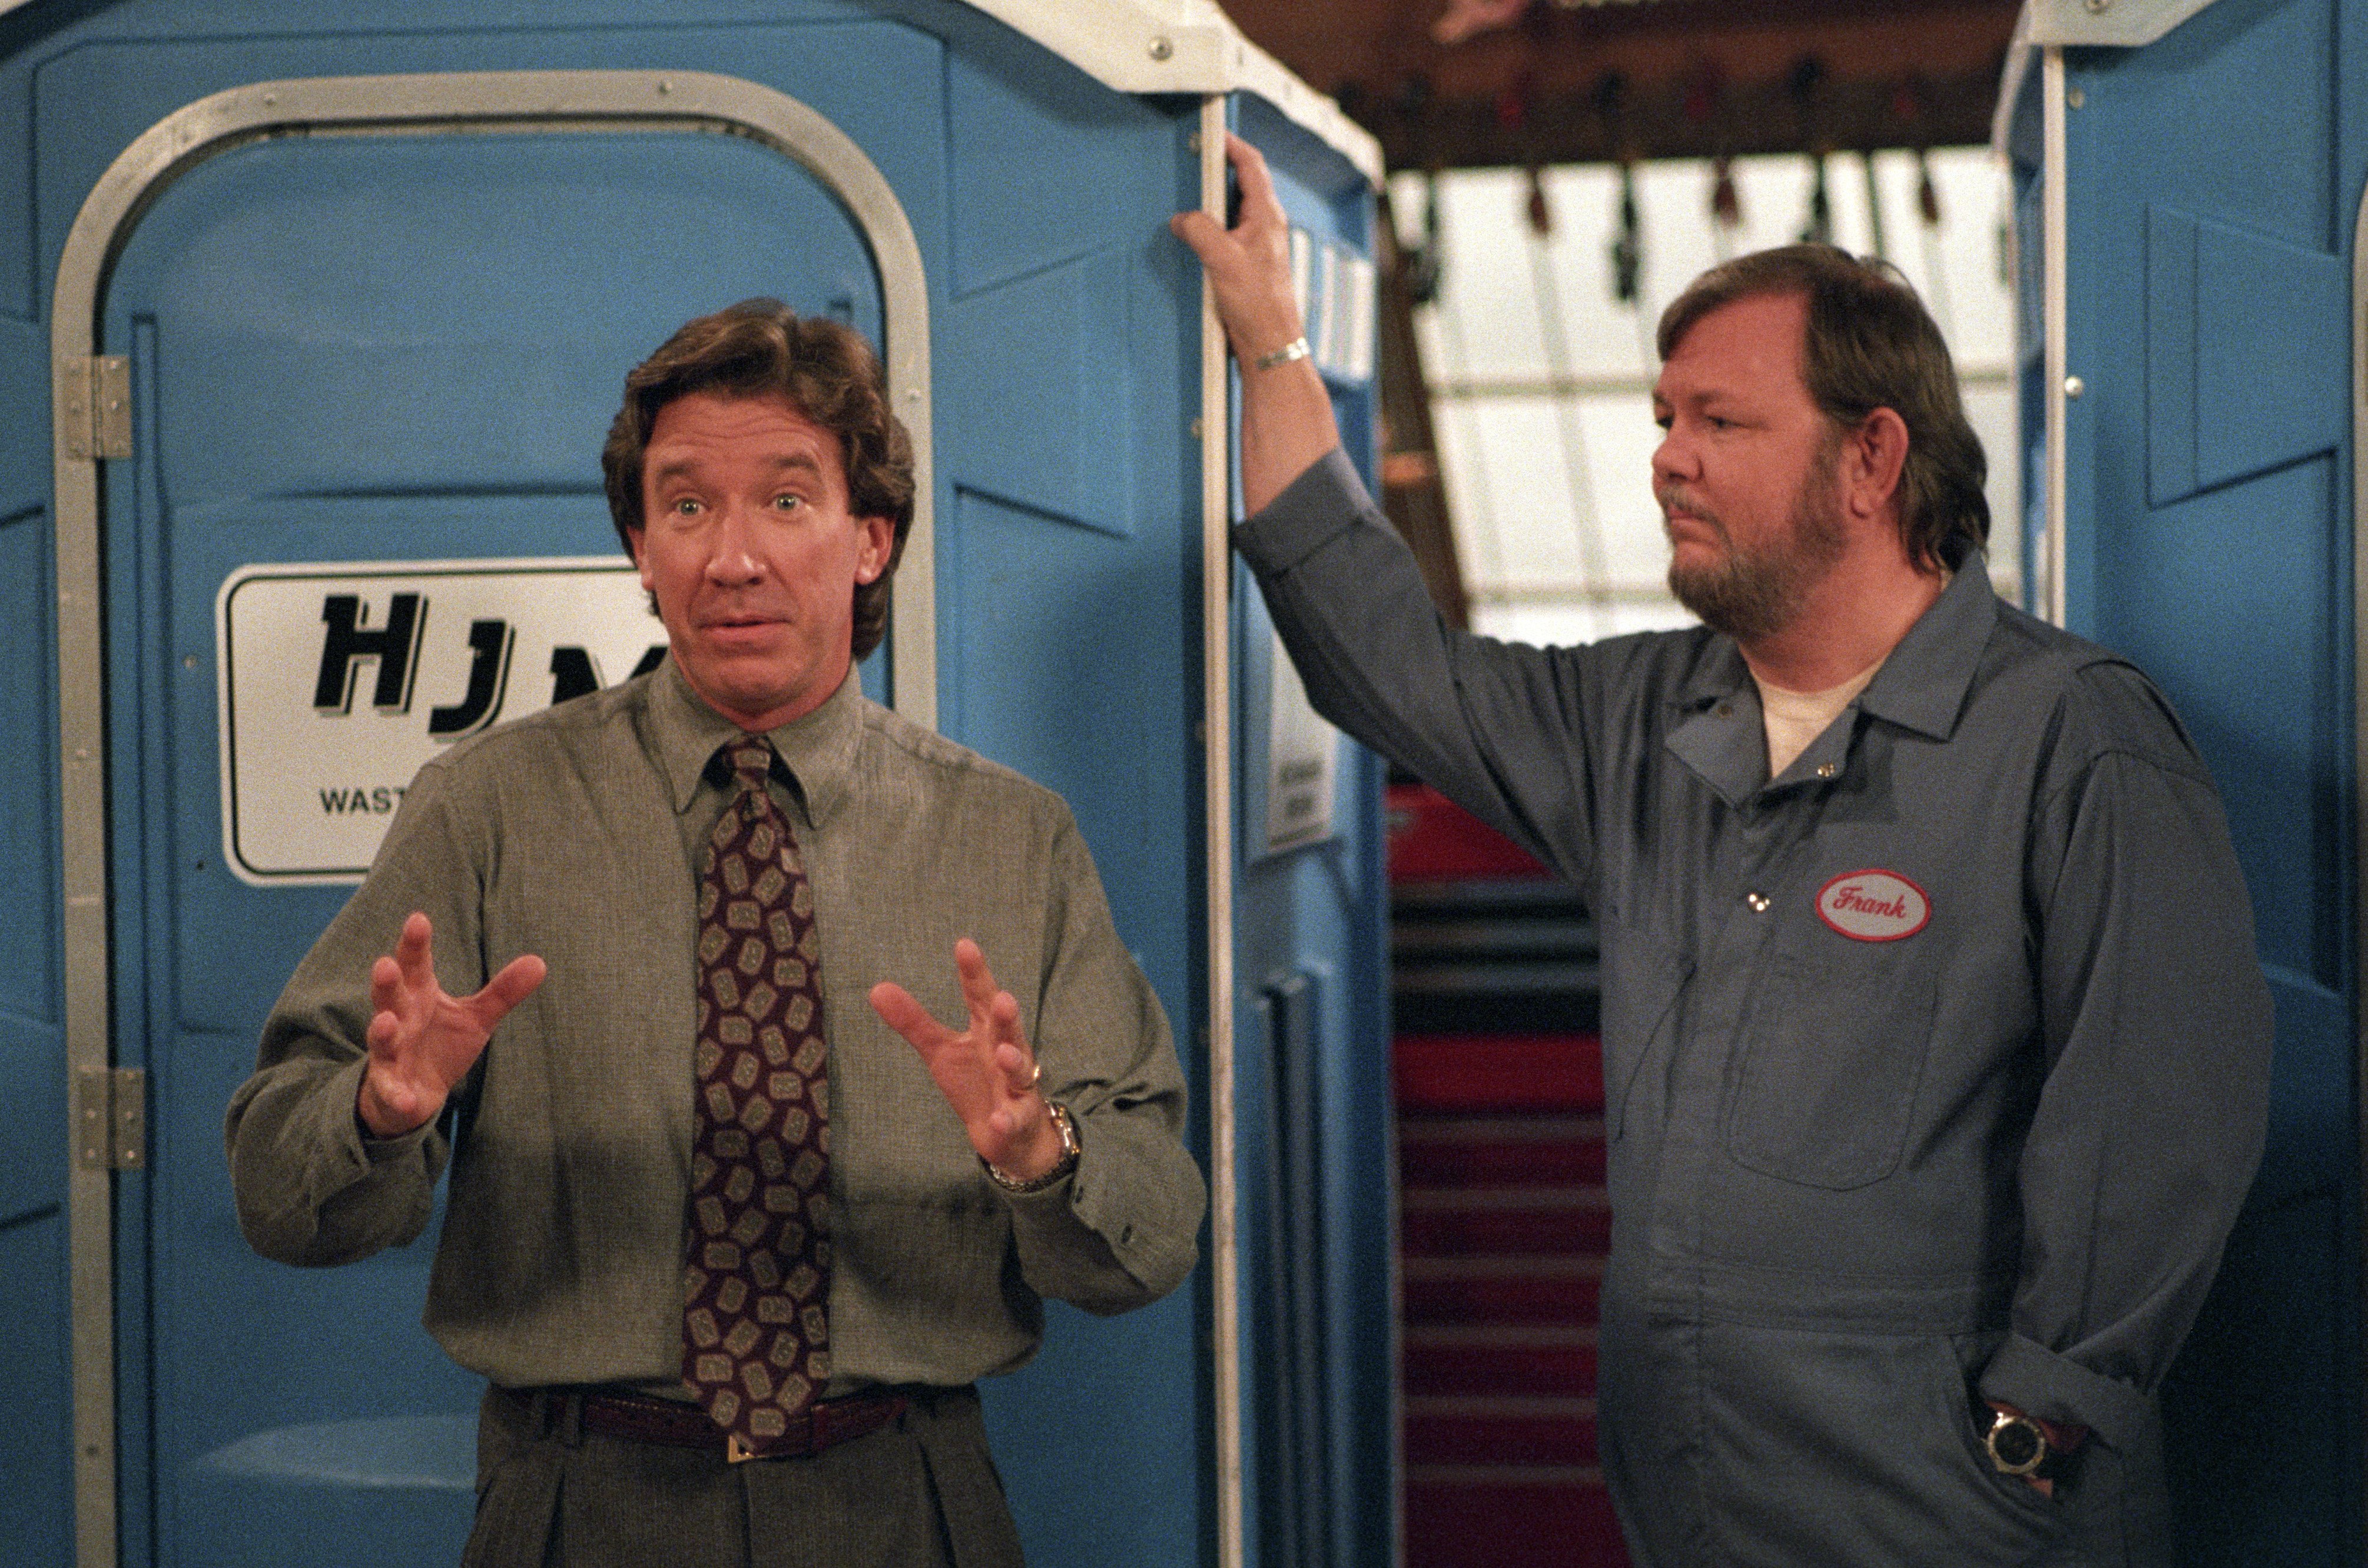 Royce Applegate pictured with Tim Allen on "Home Improvements" in 1995. | Photo: Getty Images